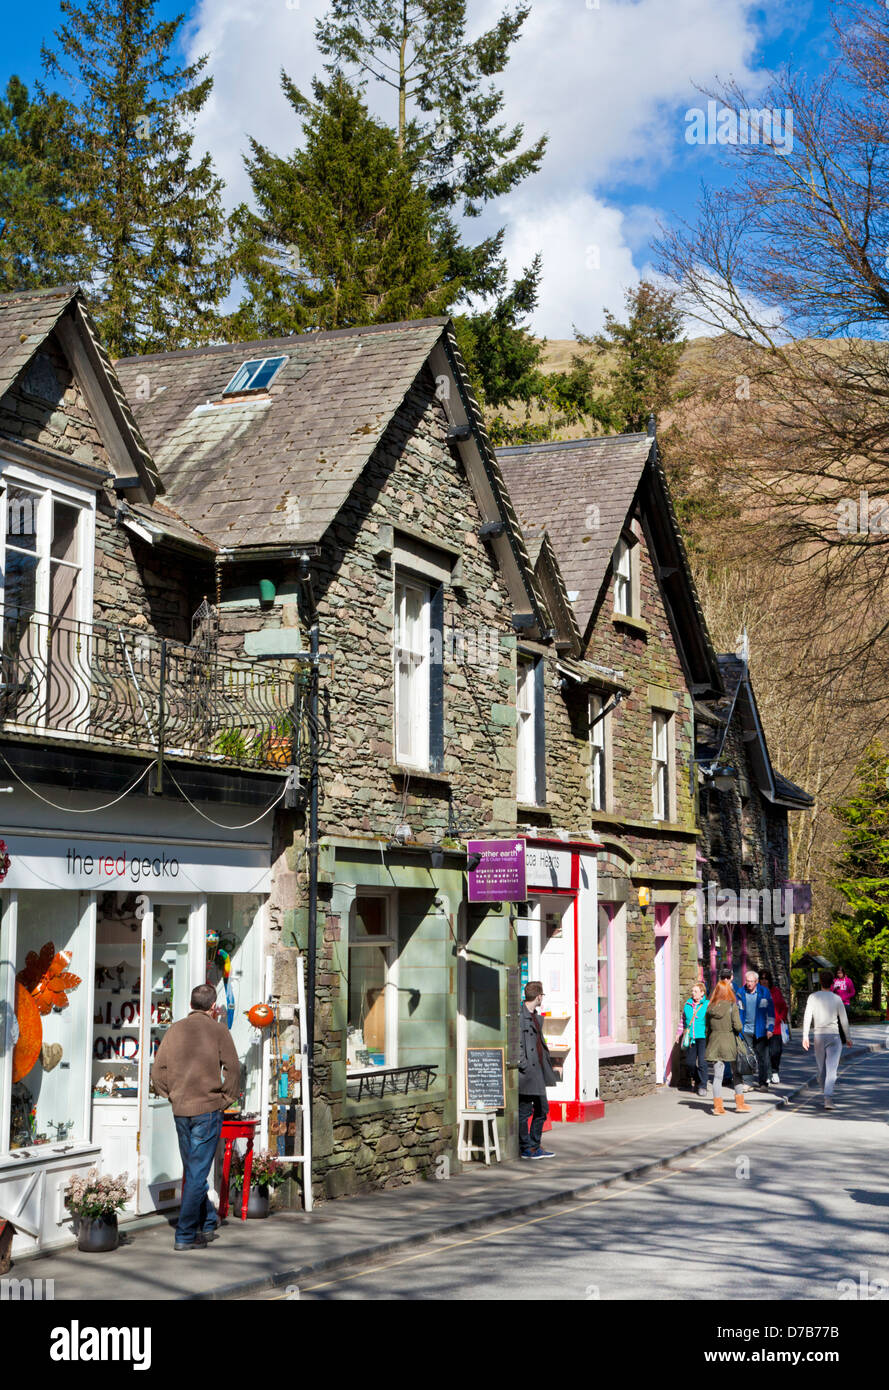 Tourists wandering around Grasmere Village with shops and cafes Cumbria Lake District England UK GB EU Europe Stock Photo